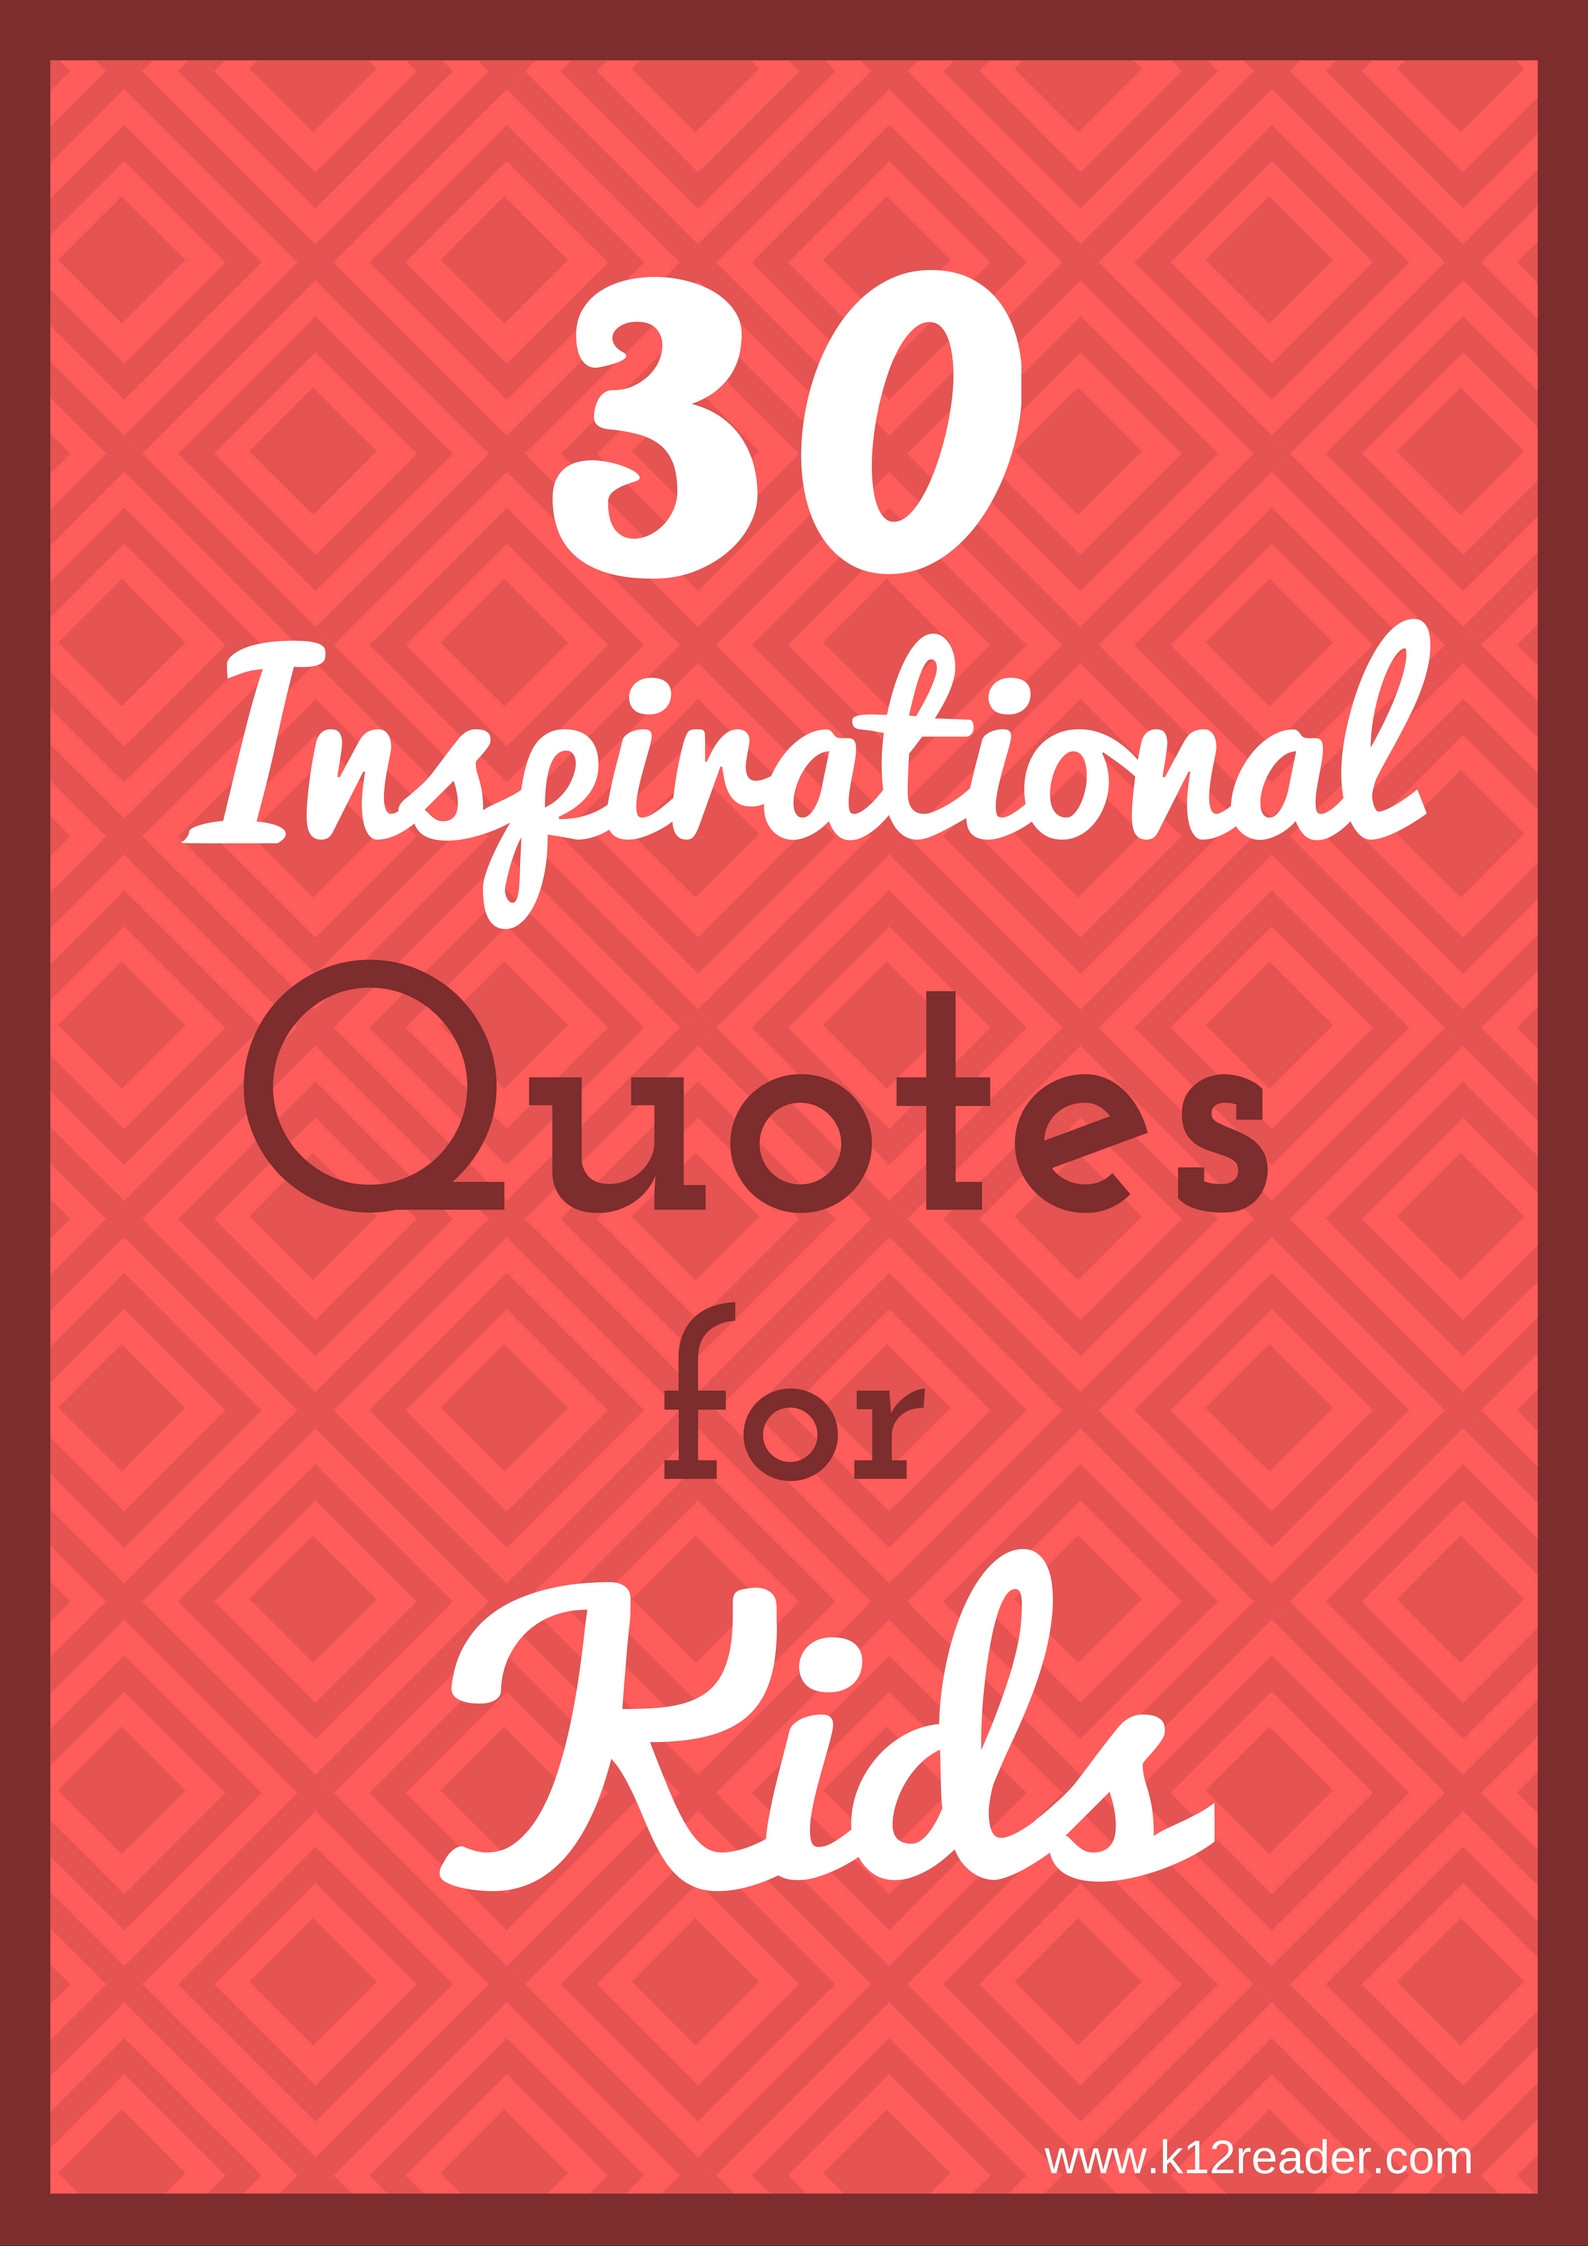 Encouraging Quotes For Children
 30 Inspirational Quotes for Kids